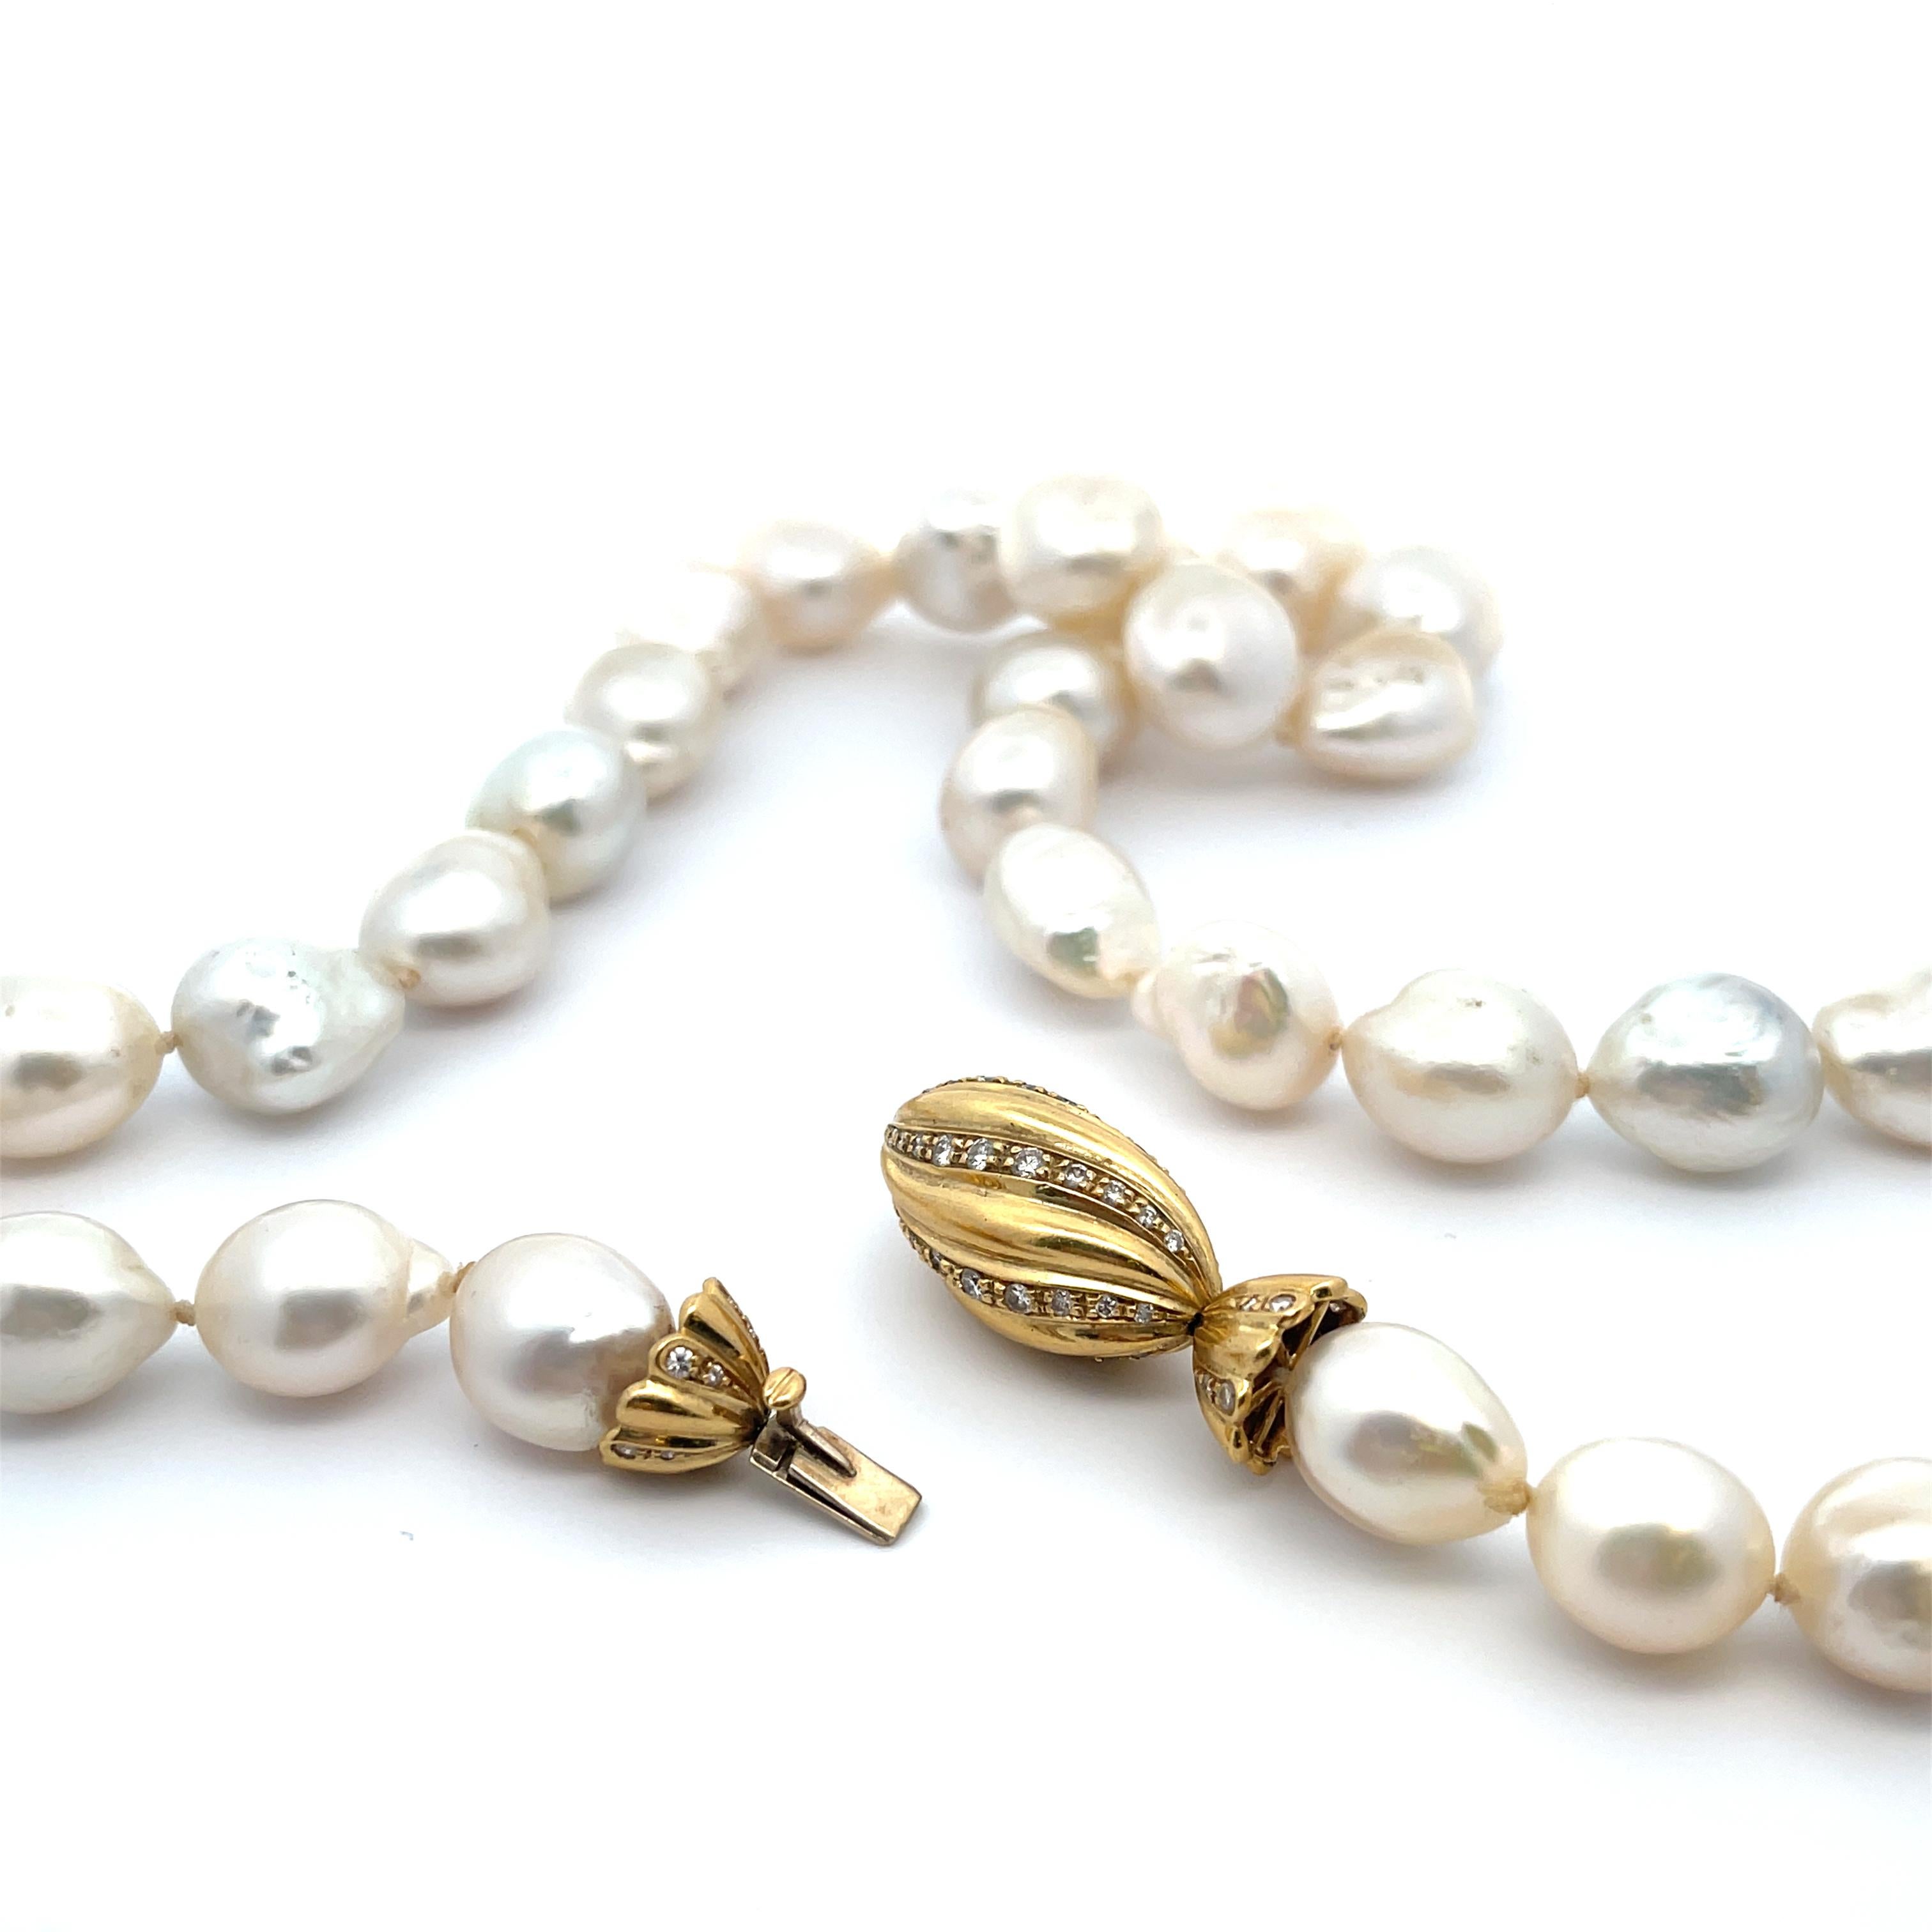 South Sea White Baroque Pearl Necklace with 18K Yellow Gold Diamond Clasp. 13-15mm pearls.
23